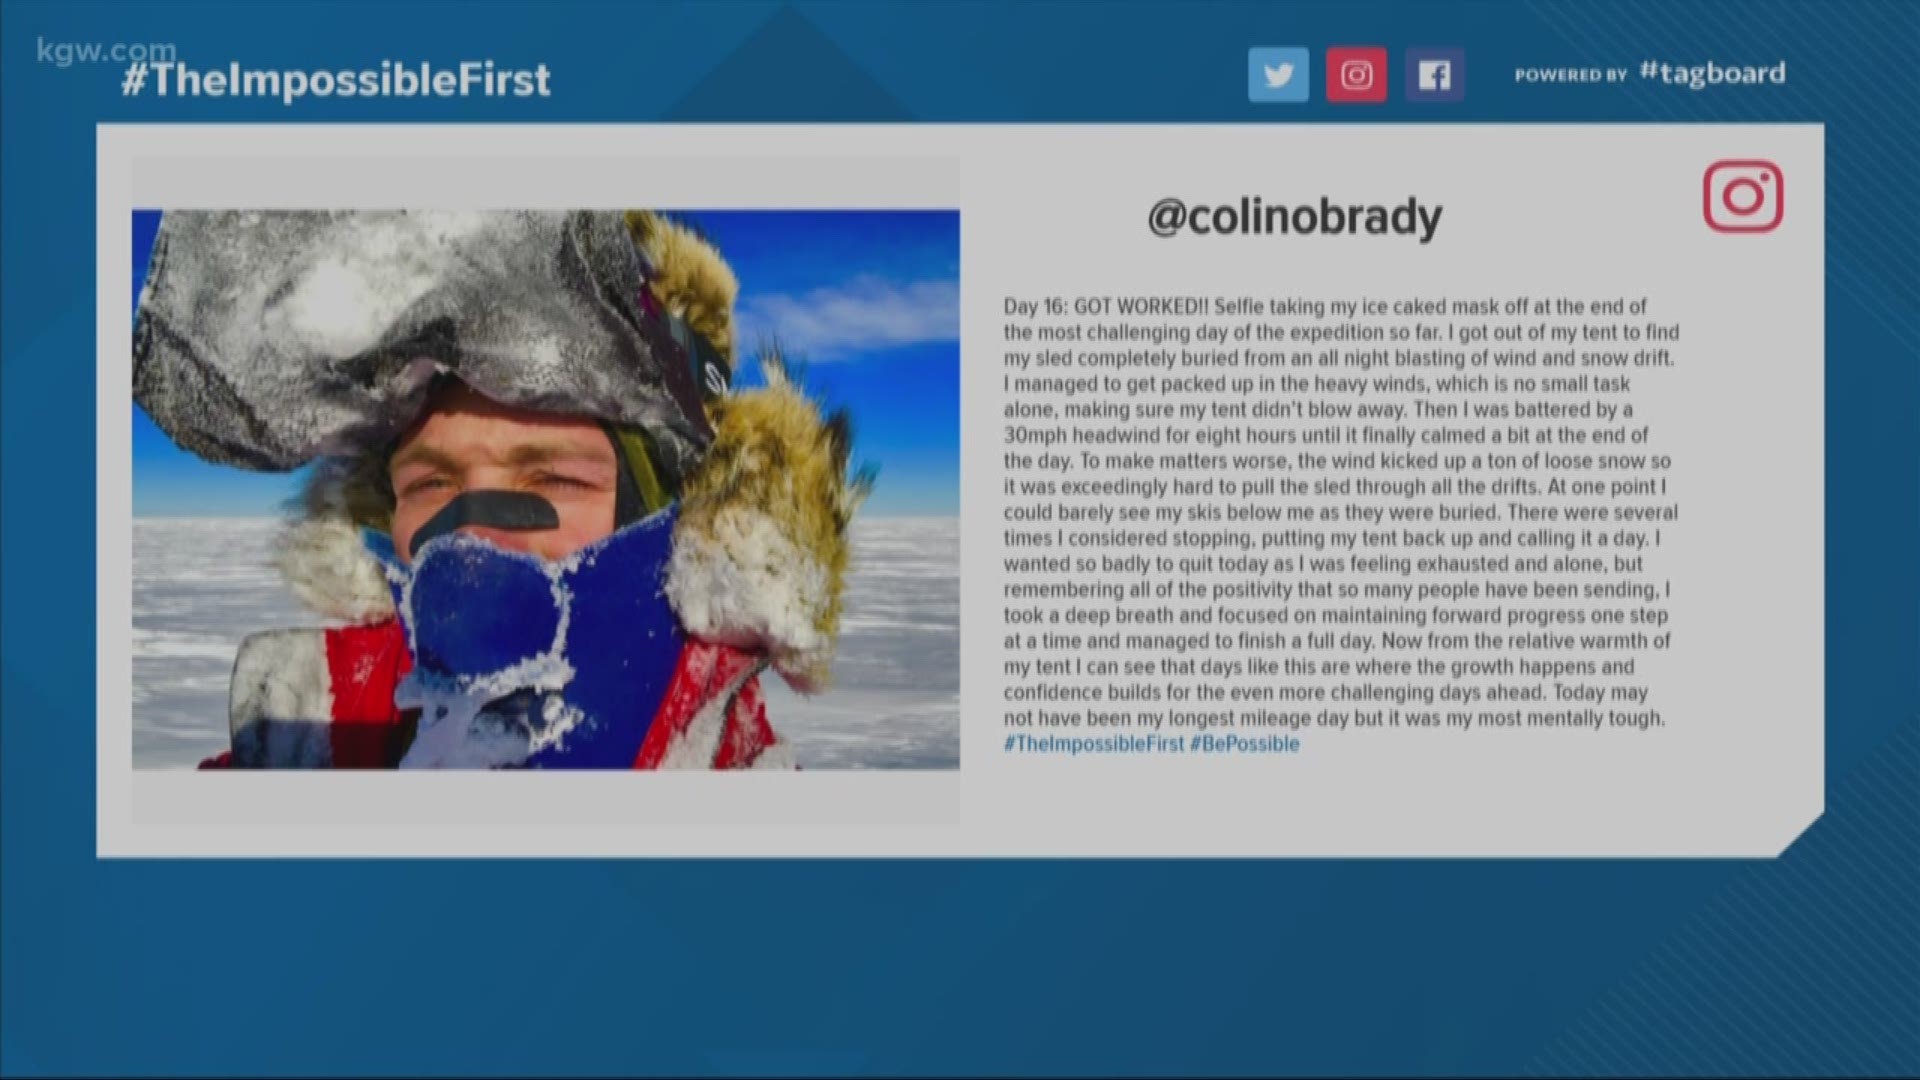 Colin is on day 17 of his 70 mission to cross Antarctica by himself. He eats an insane amount of calories to keep himself fueled up!
#TheImpossibleFirst
#TonightwithCassidy